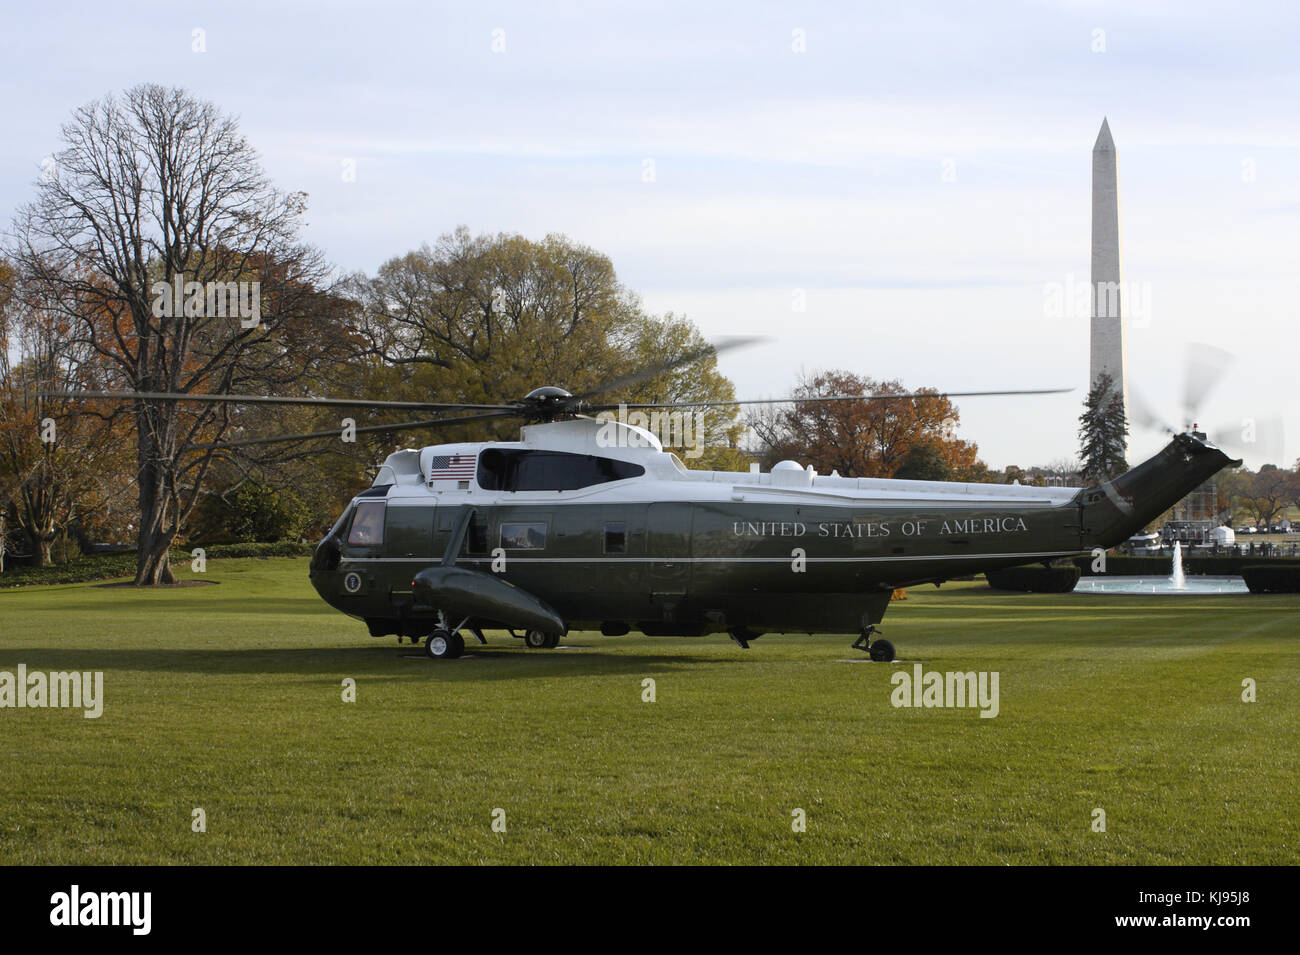 Washington, District of Columbia, USA. 21st Nov, 2017. A marine Sikorsky VH-3D Sea King helicopter, known as Marine One since President Trump is on board, seen on the South Lawn of the White House as it prepares to take him to Joint Base Andrews. Seen in the background is the Washington Monument. Credit: Evan Golub/ZUMA Wire/Alamy Live News Stock Photo